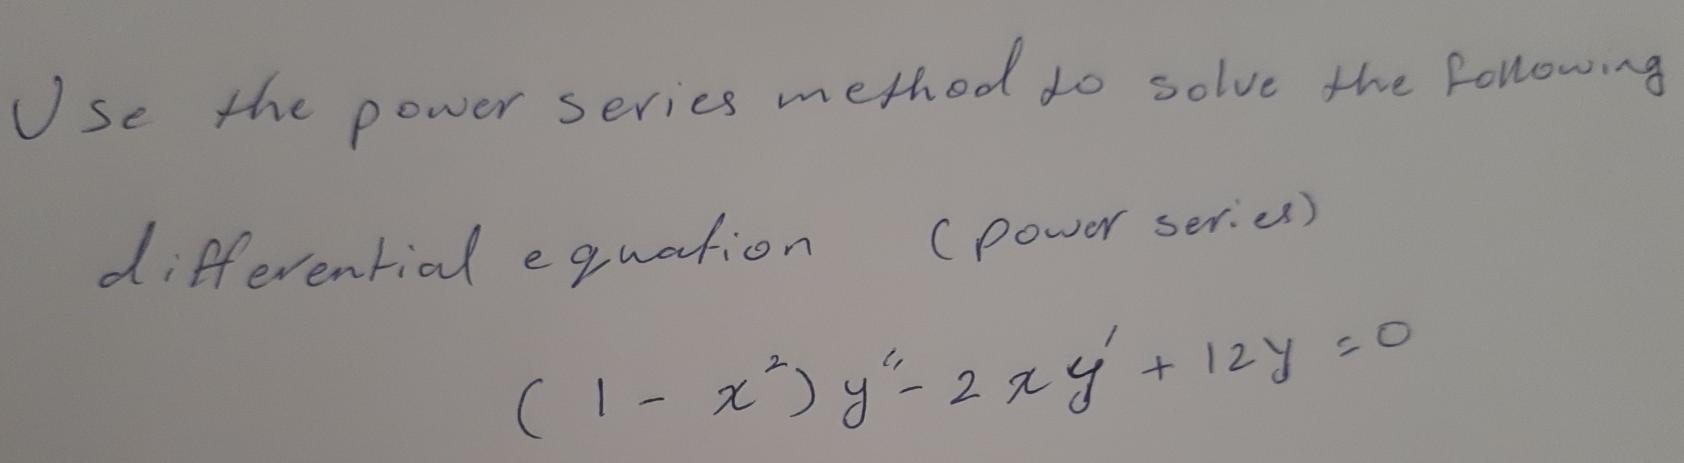 Use The Power Ower Series Method To Solve The Following Differential Equation Power Series 1 X Y 2 X 4 12y 0 1